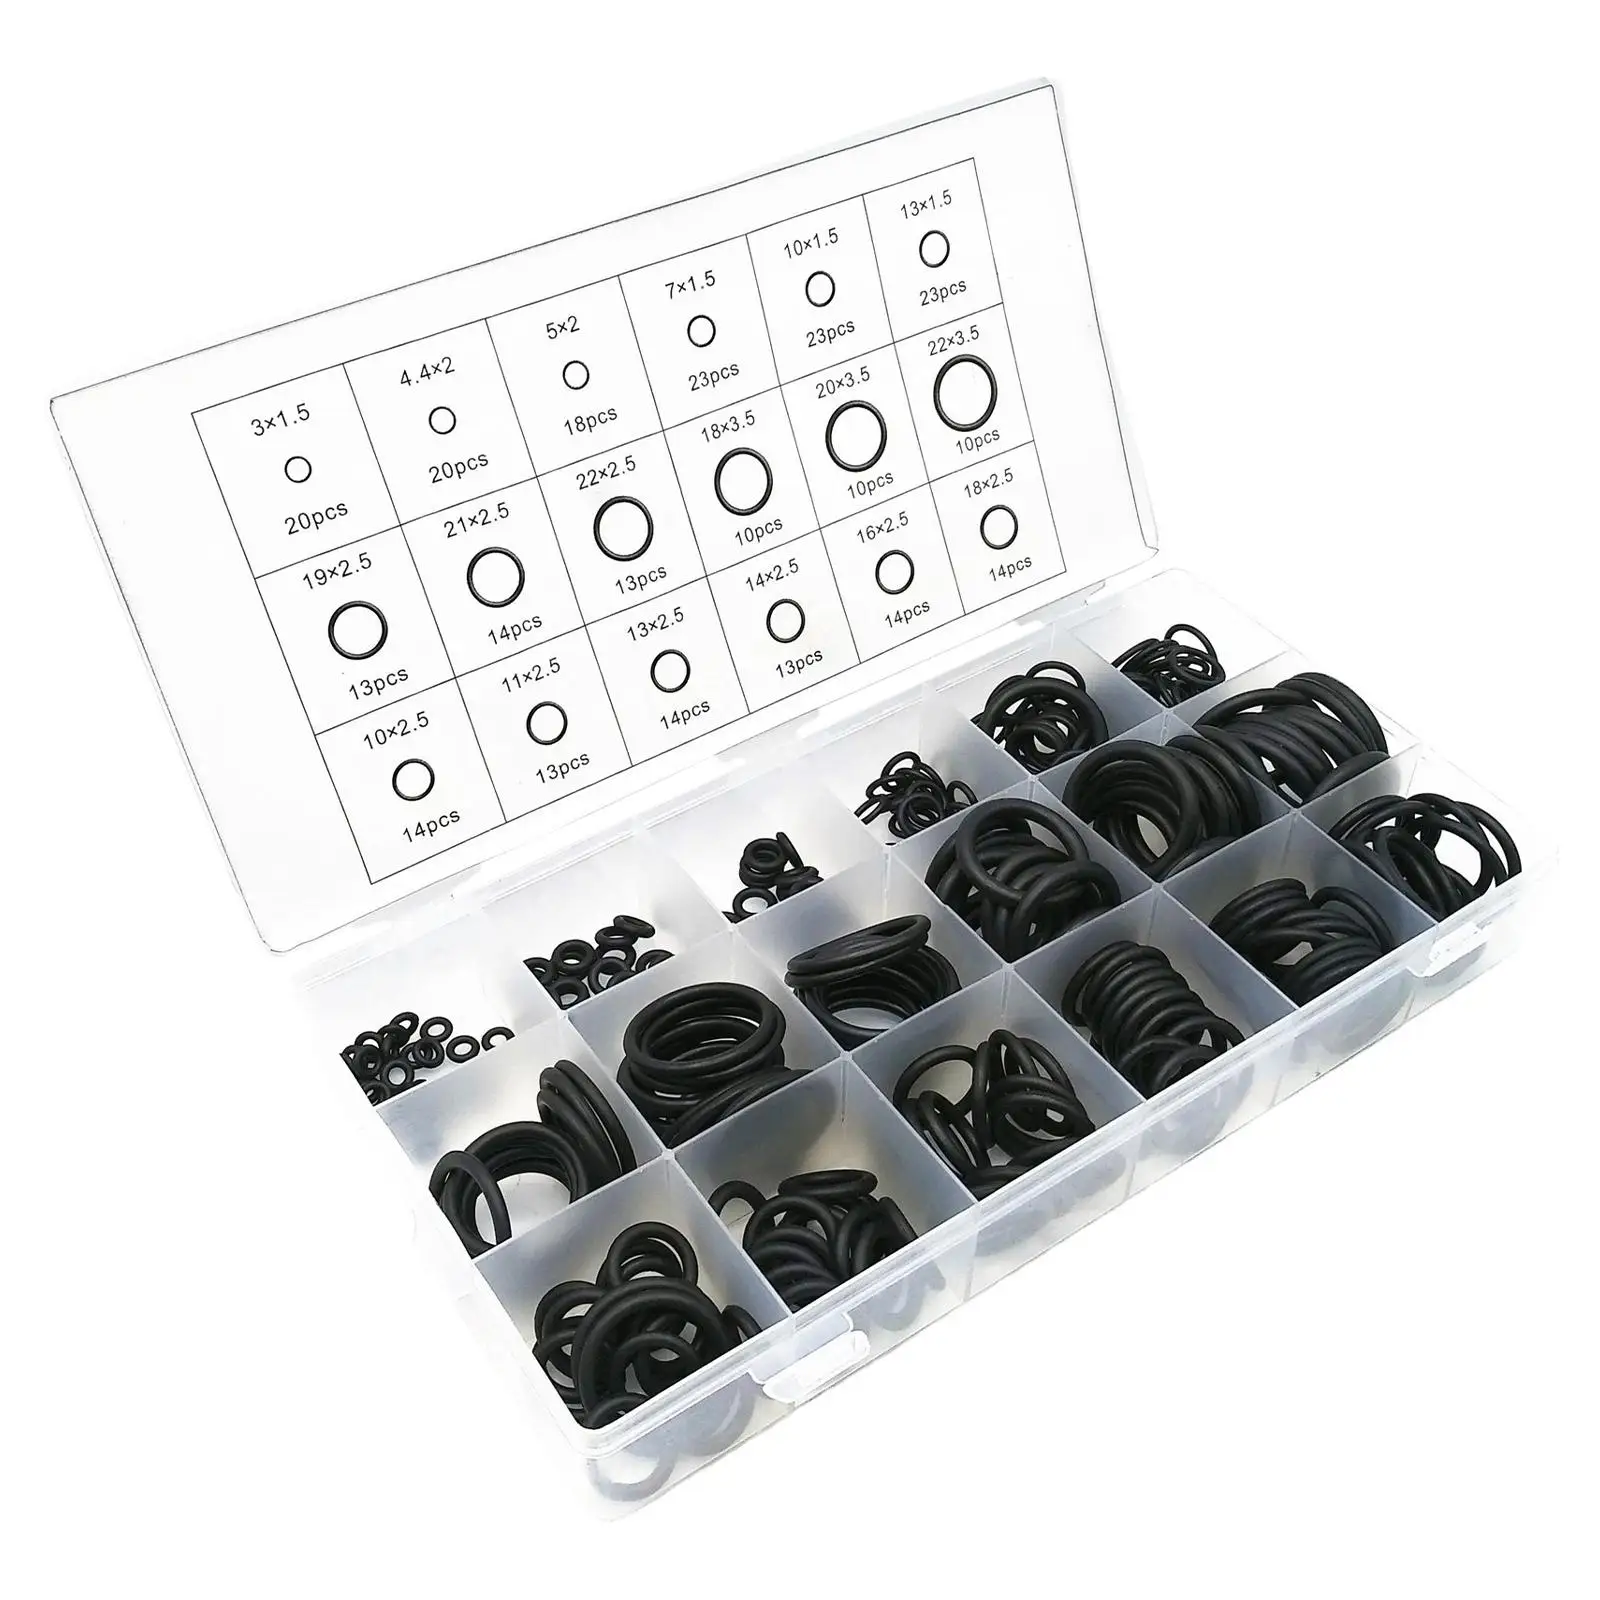 279Pcs O Ring Assortment Set 18 Different Sizes Assorted Sealing Washer Black Small for Hydraulic Plumbing Vehicle Repair